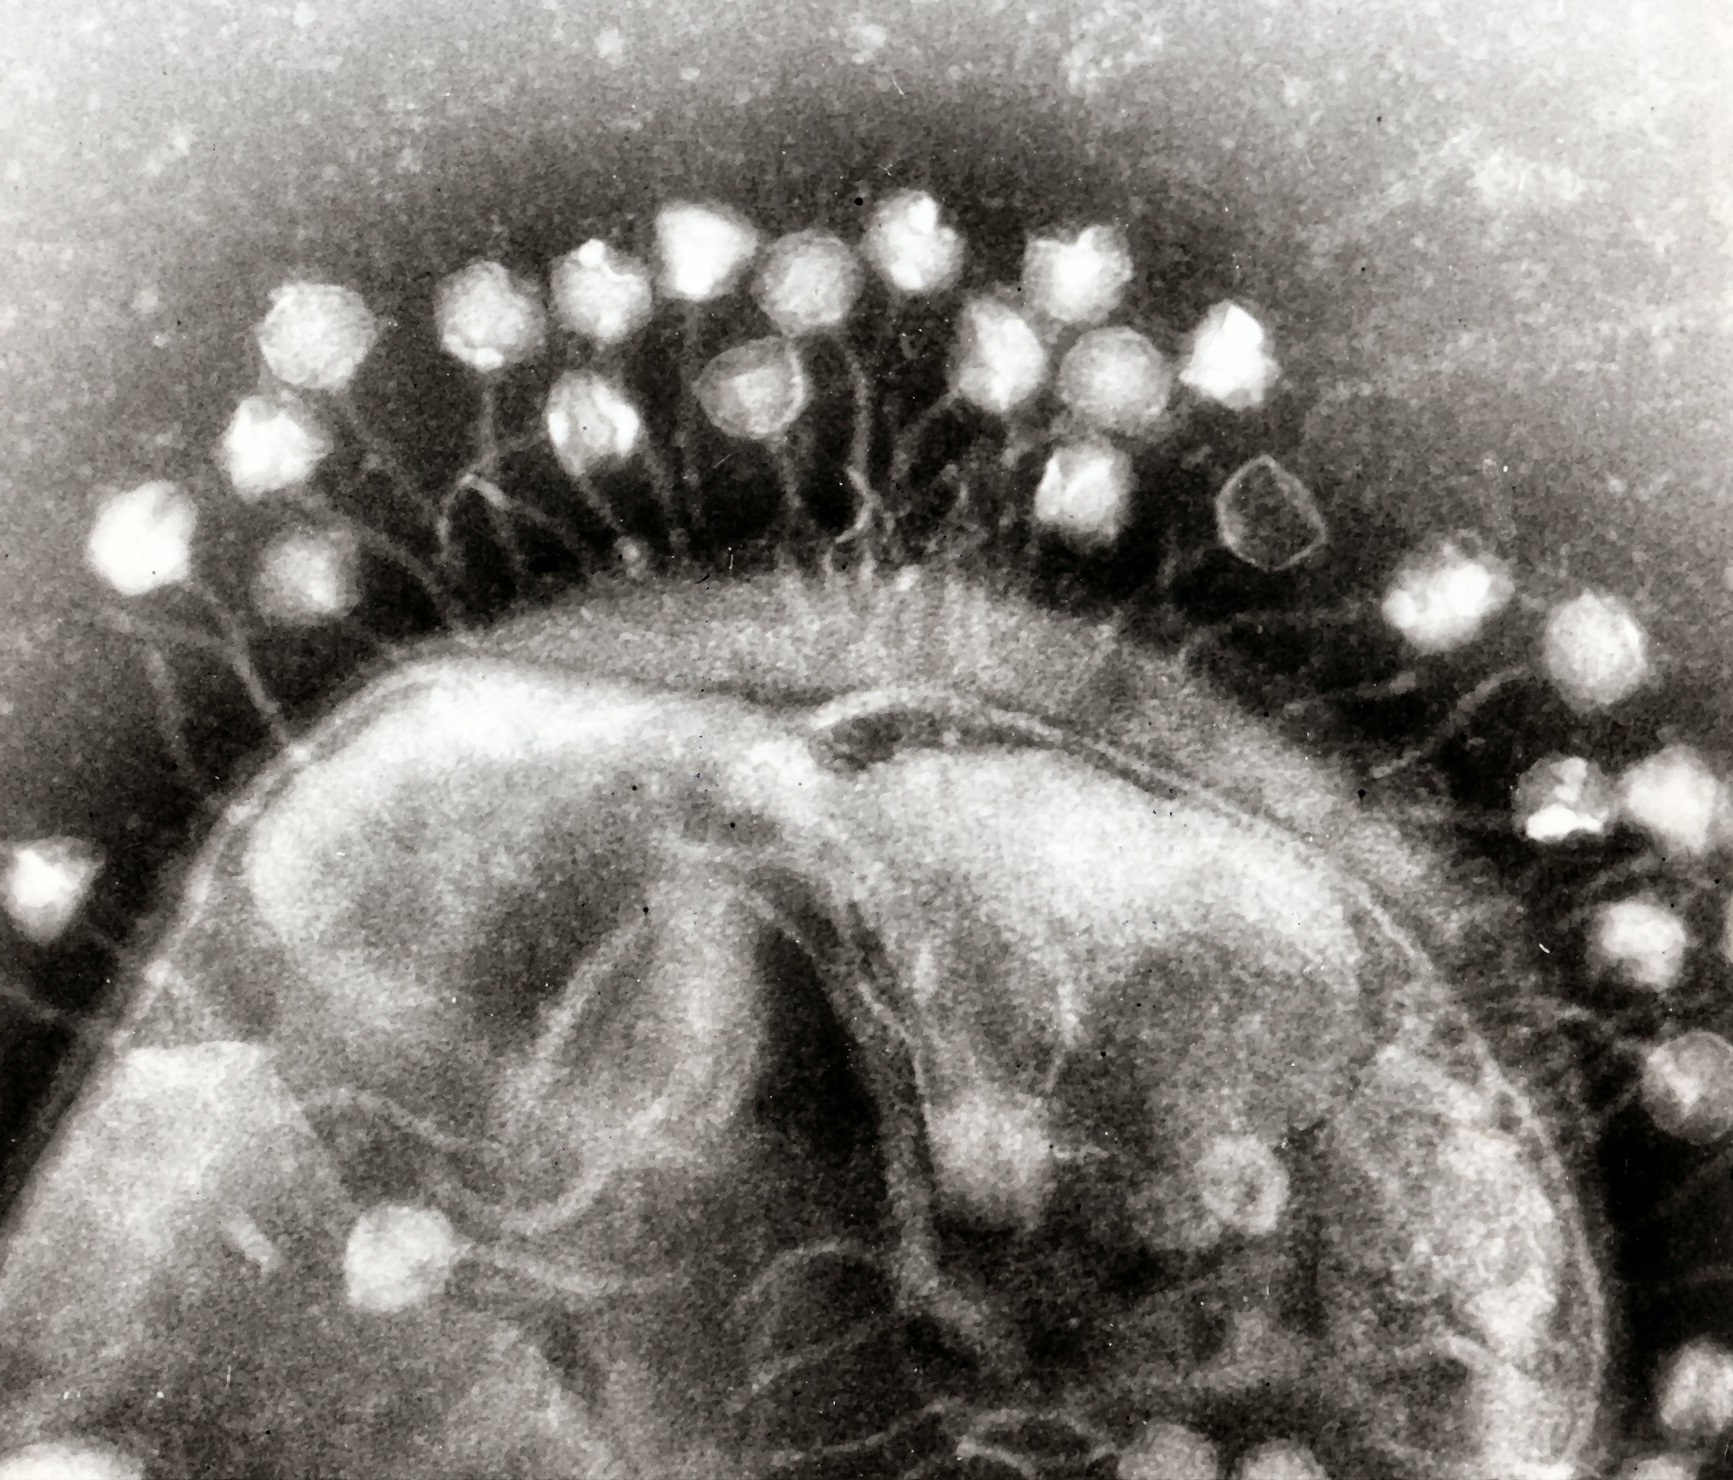 Bacteriophages cling to the outside of a bacterial cell